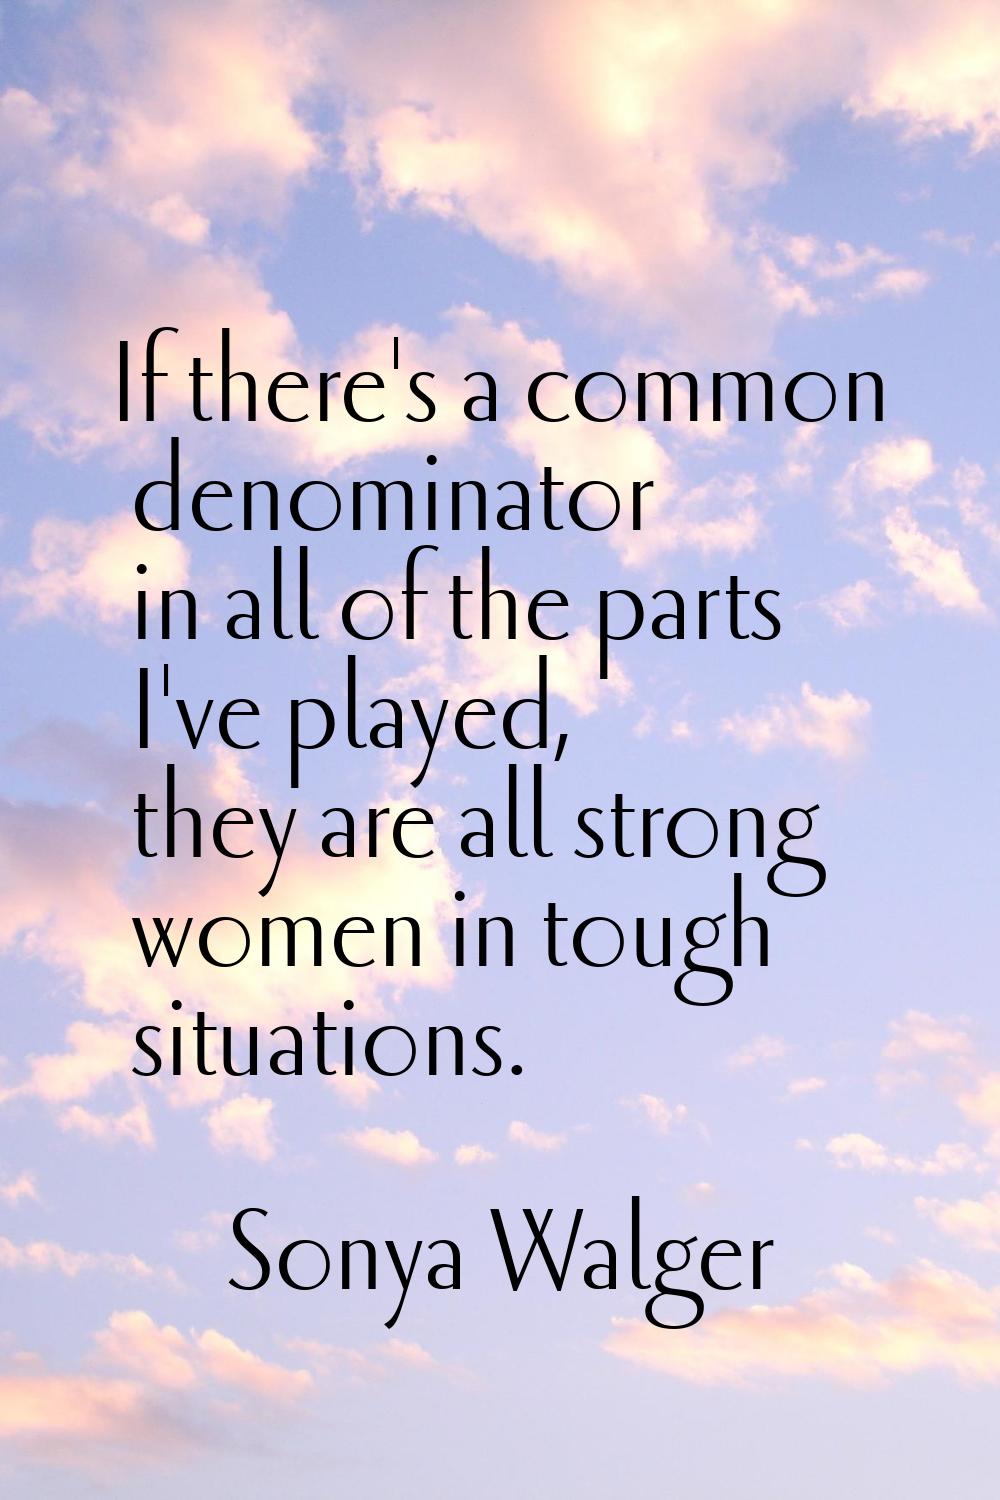 If there's a common denominator in all of the parts I've played, they are all strong women in tough